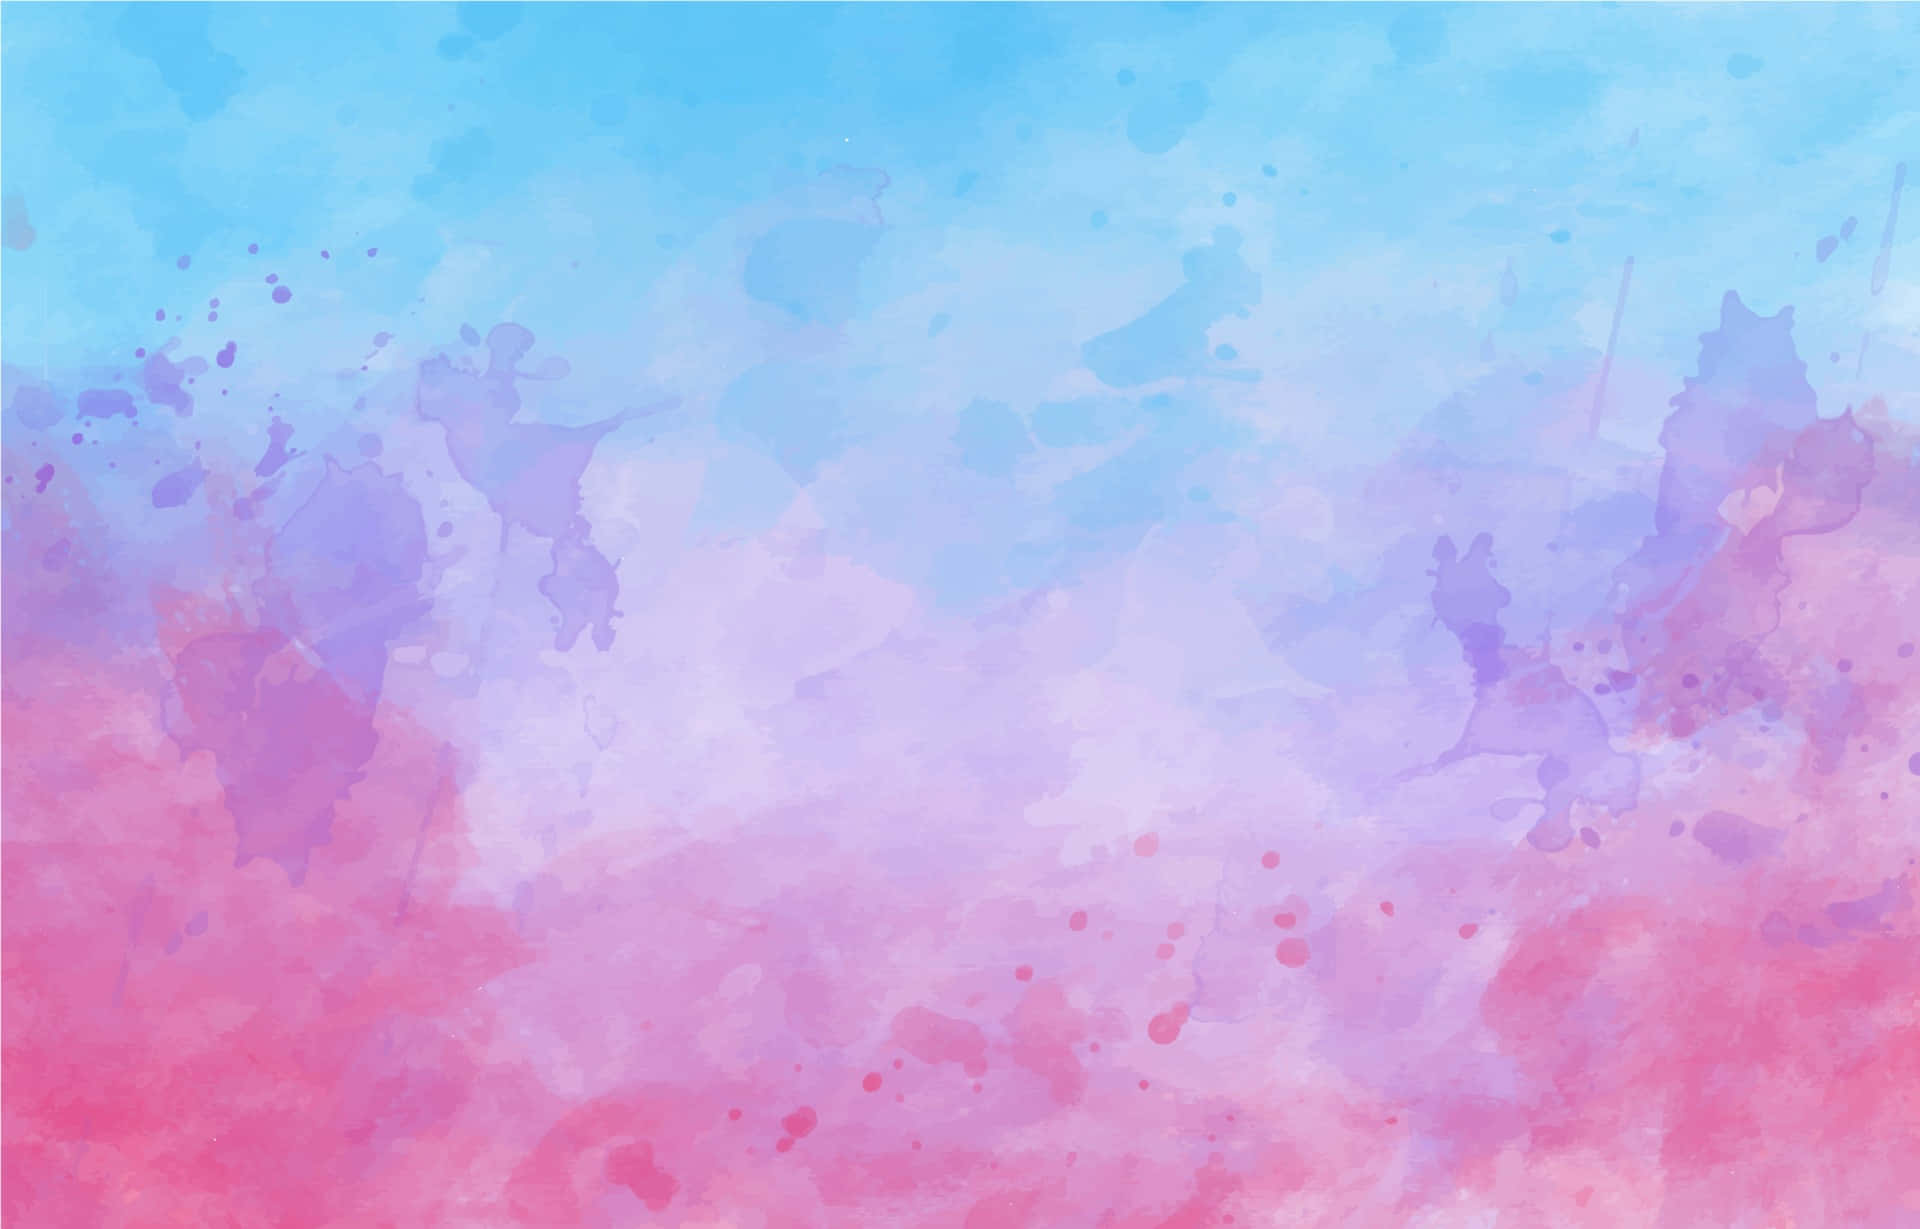 watercolor background with blue and pink splatters